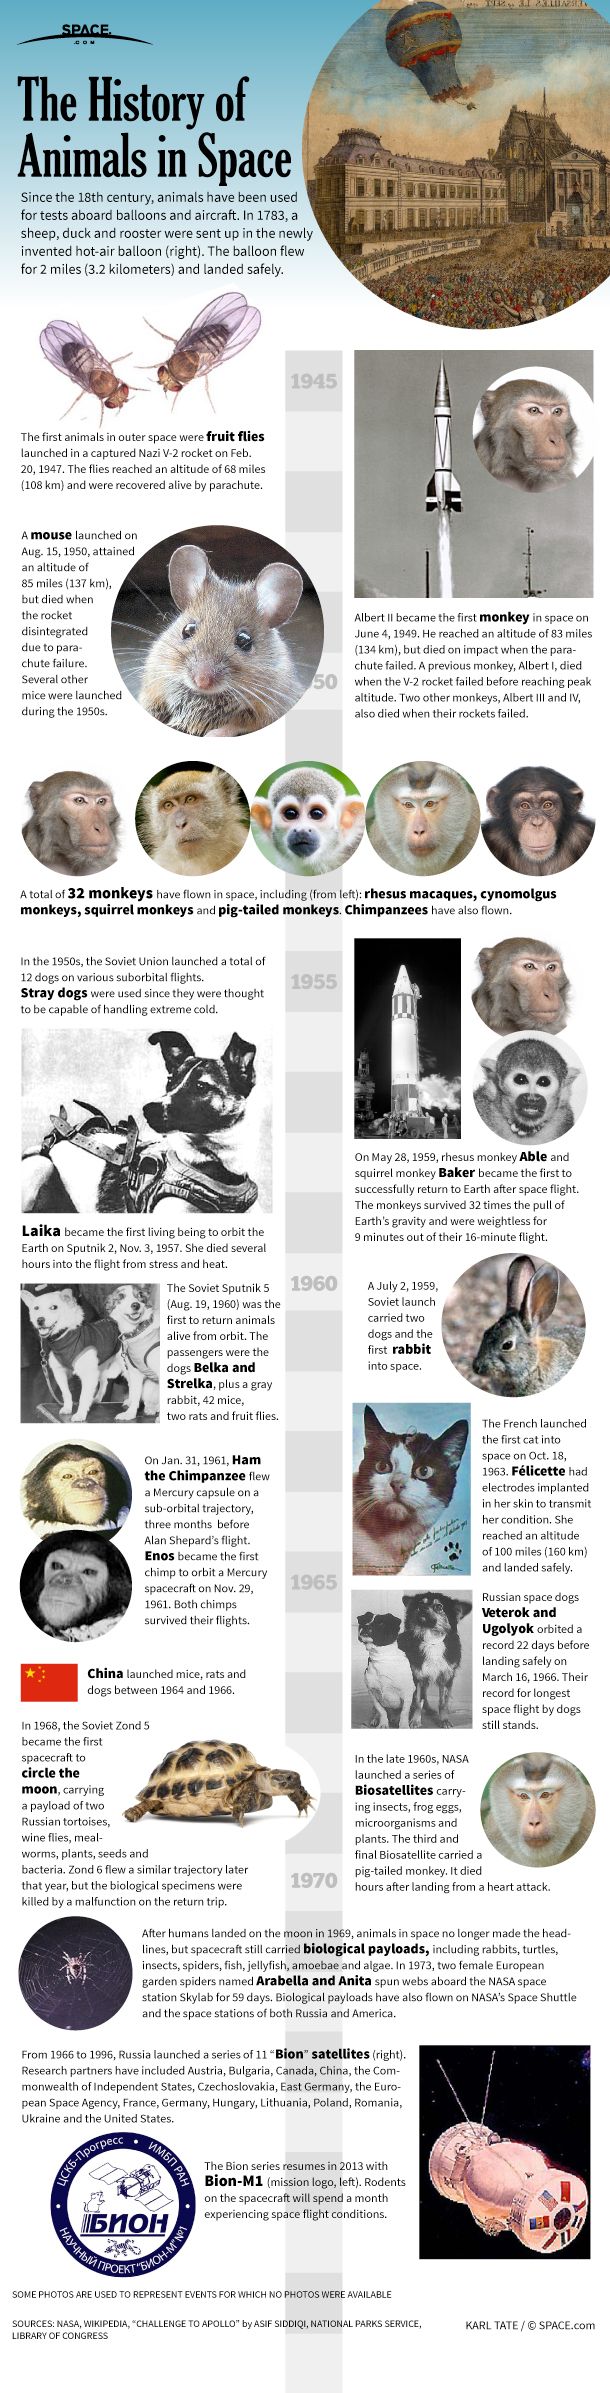 Mice, Flies, Cats, Dogs and Monkeys: The History of Animals in Space  (Infographic) | Space